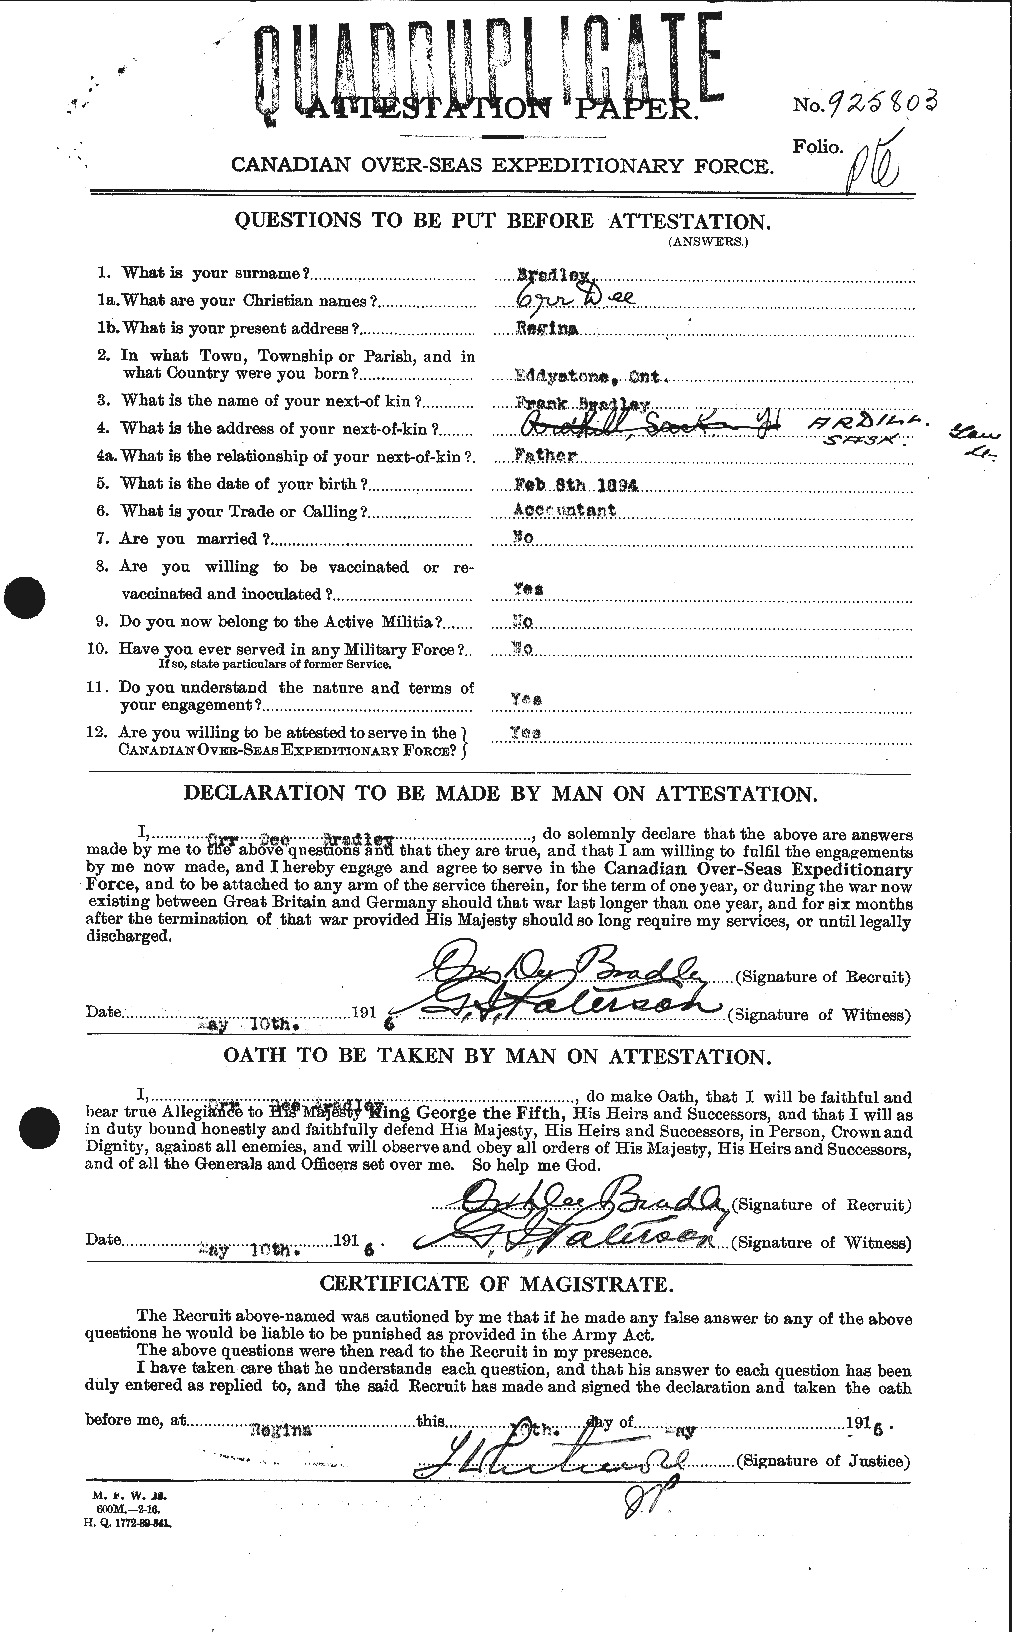 Personnel Records of the First World War - CEF 259059a